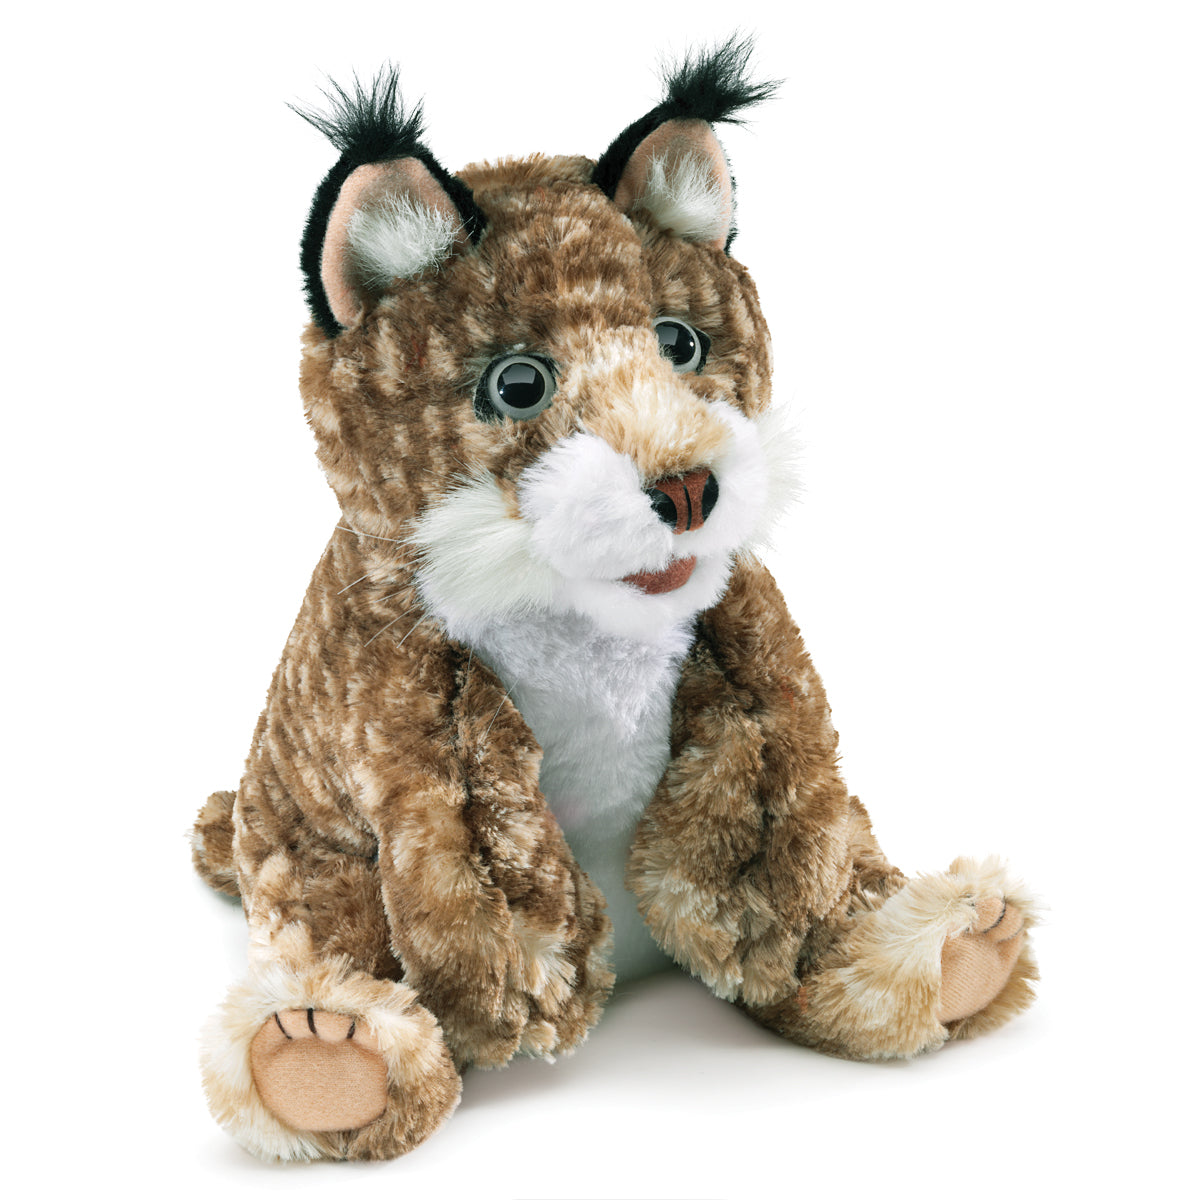 Bobcat Kitten puppet by Folkmanis is soft with brown and tan spotted plush, this wide-eyed critter has movable mouth and legs for multiple ways to play. This puppet is 10 inches long, 5 inches wide, 9 inches tall and weights 3.36 ounces. This item sells for $21.99. 